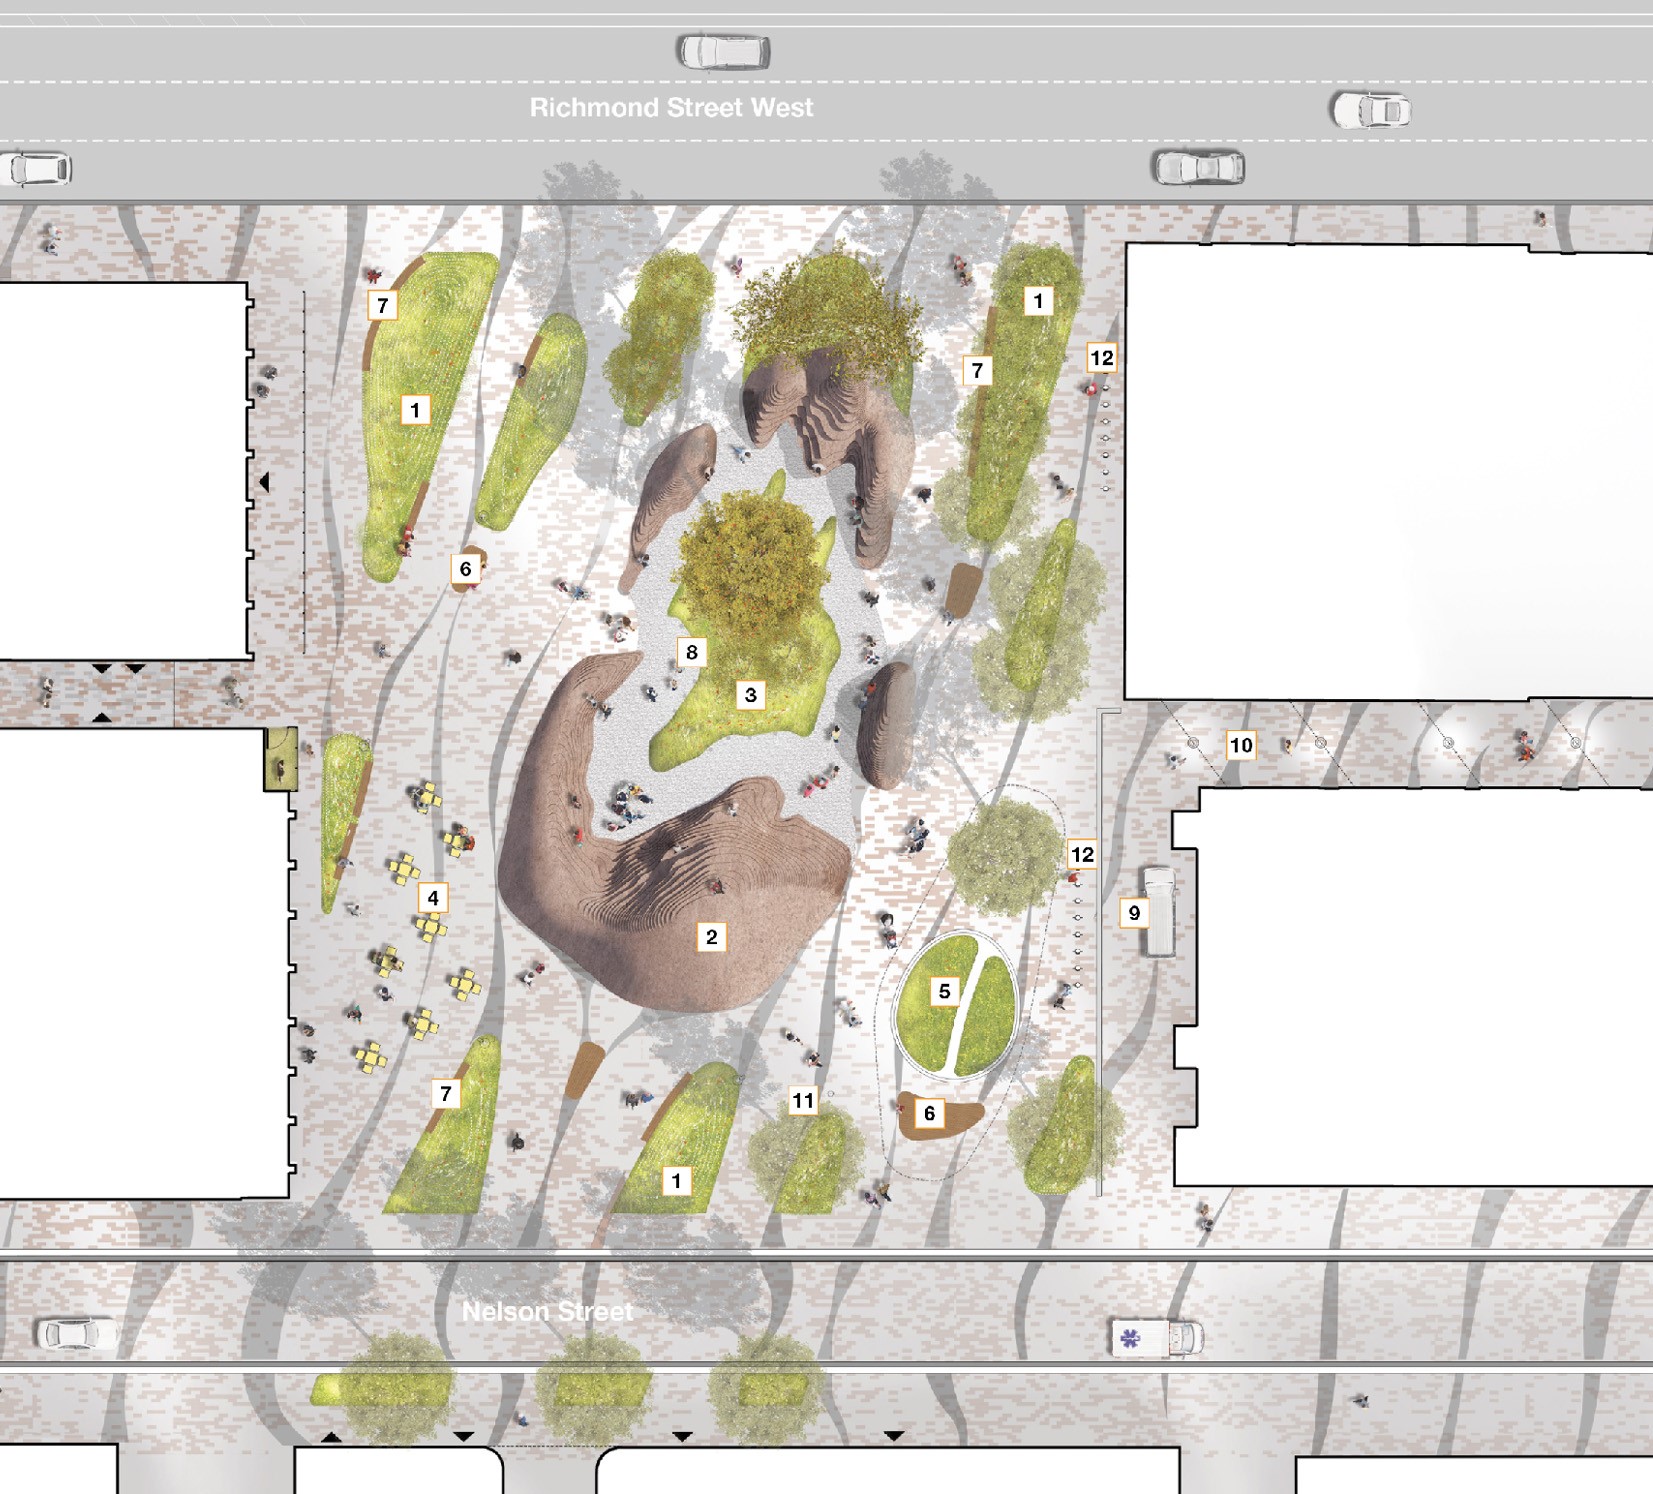 Plan view of proposed design for 229 Richmond Street West. It includes the Open Hand sculpture in the center with a central planting area, planted landforms, seating, in ground misters, permeable pavers, water fountain and bike racks.